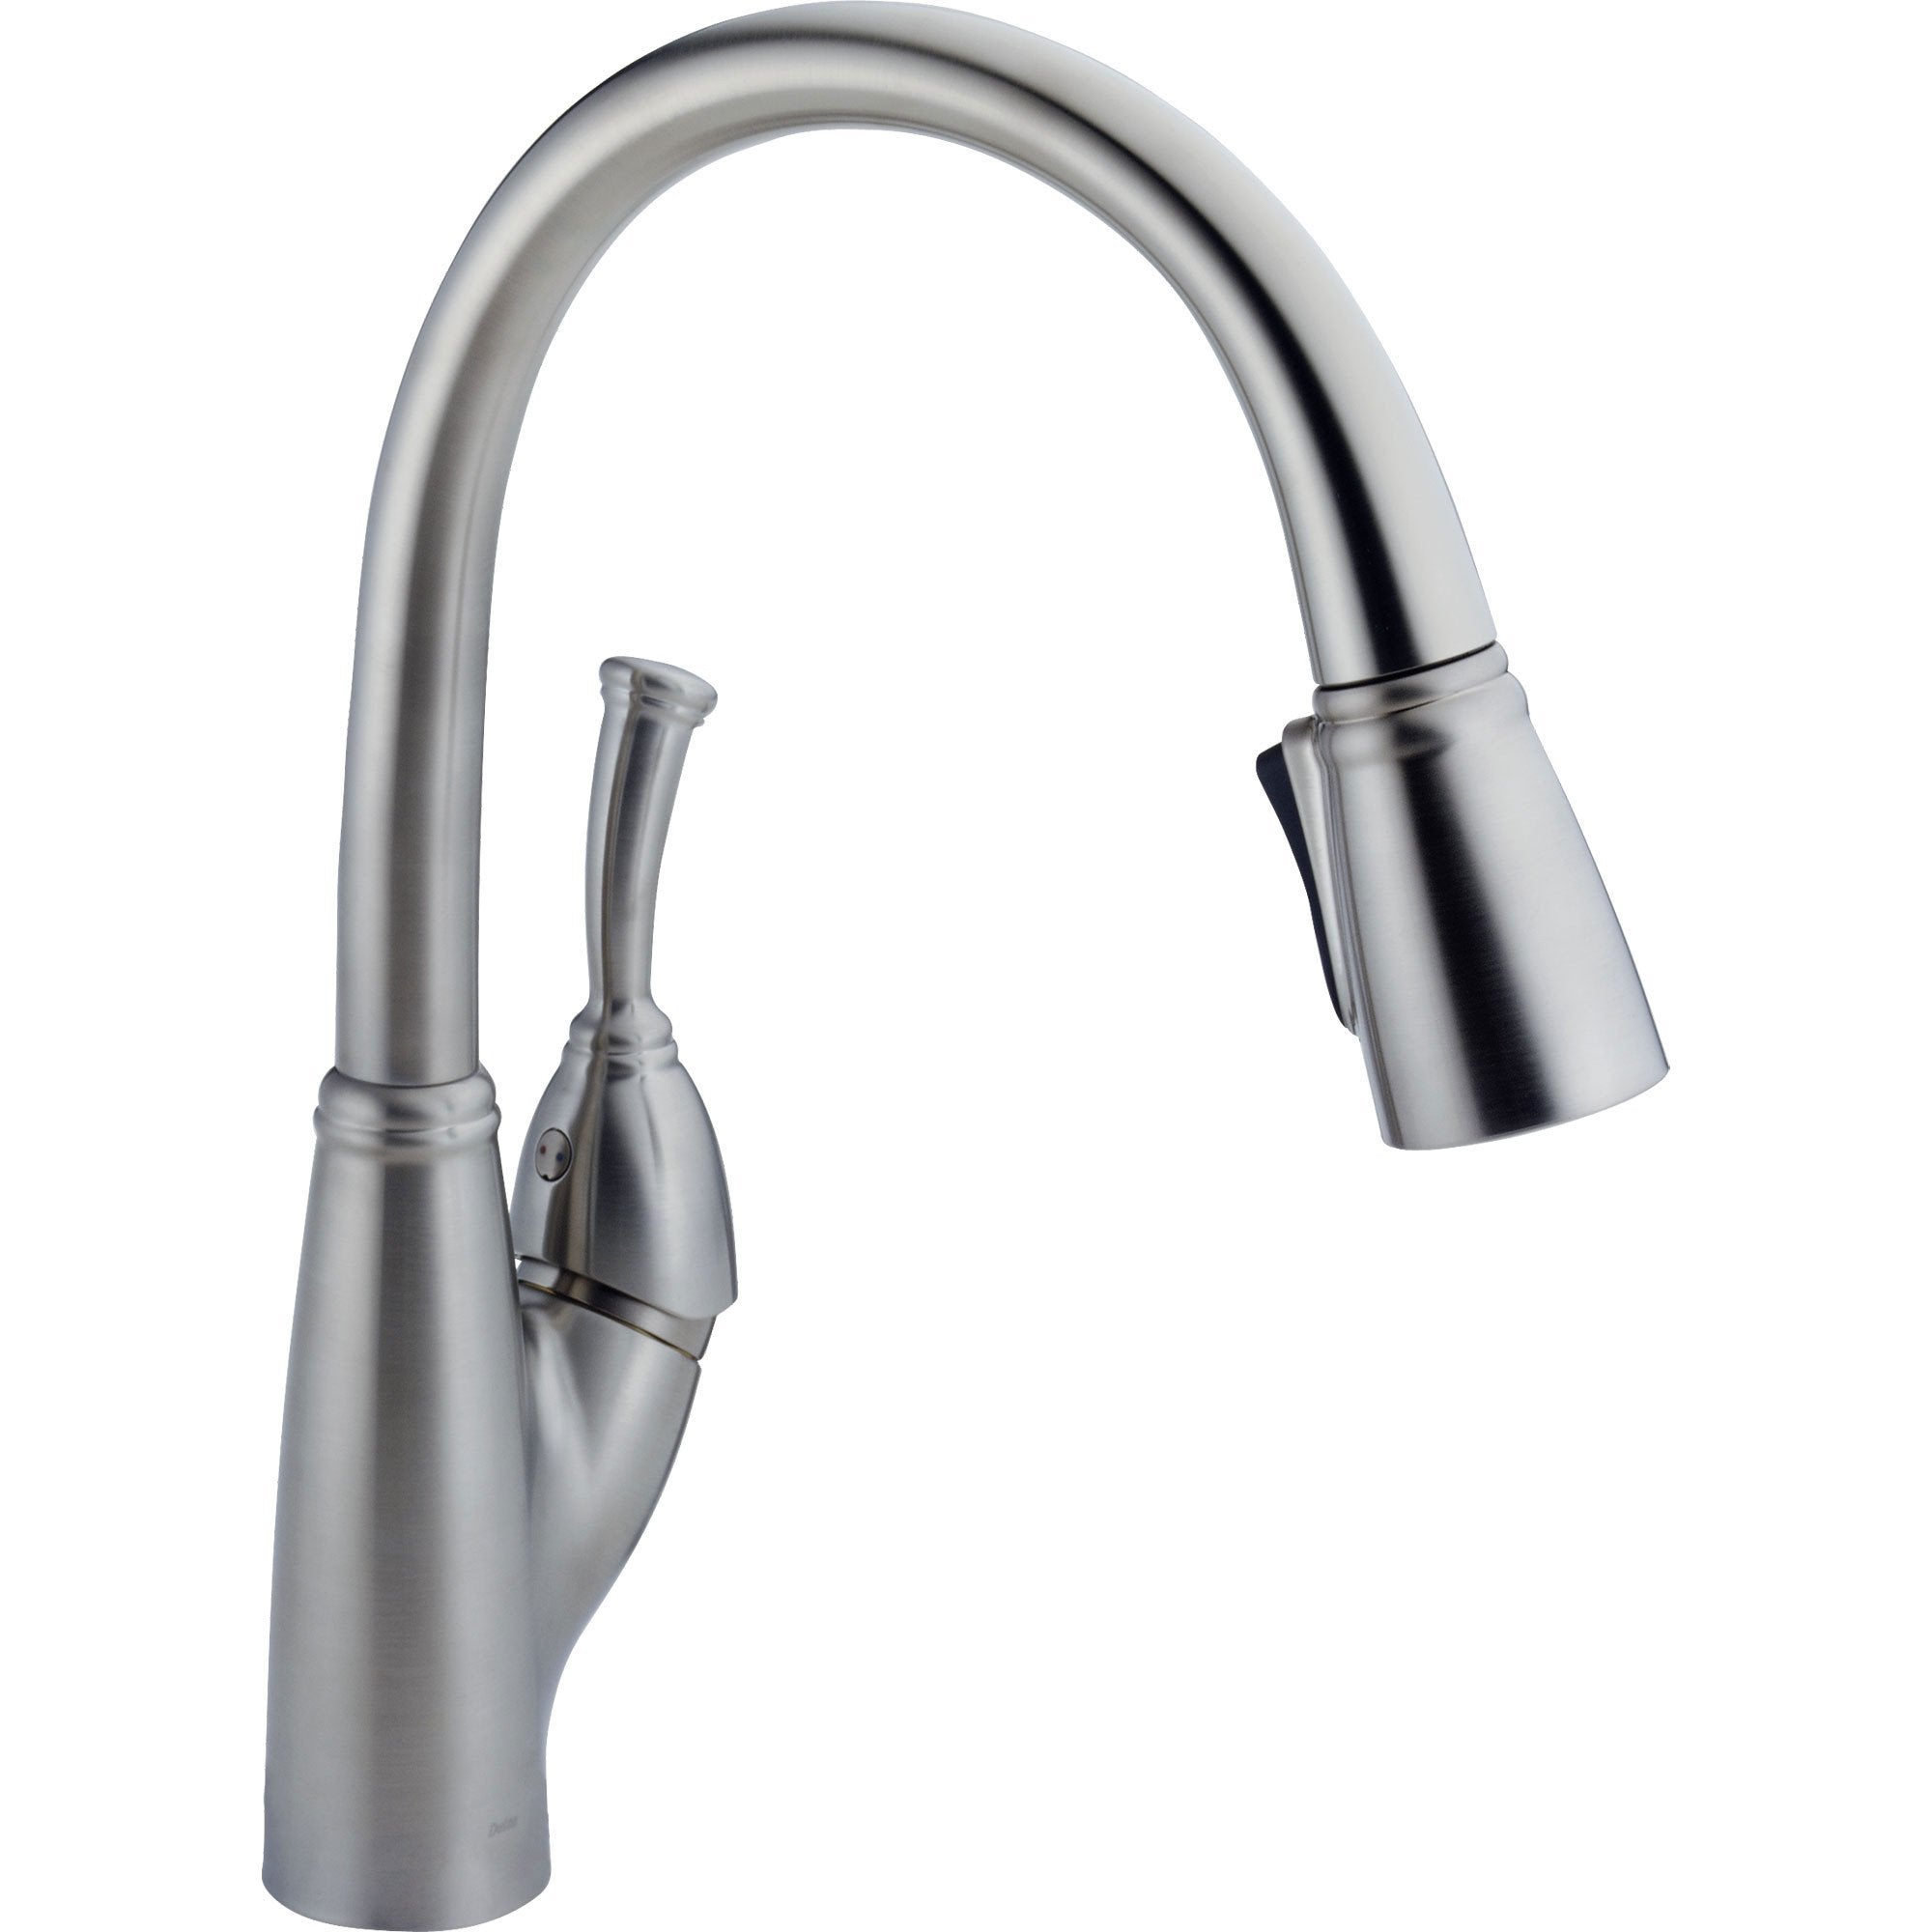 Delta Allora Arctic Stainless Single Handle Pull-Out Spray Kitchen Faucet 573005